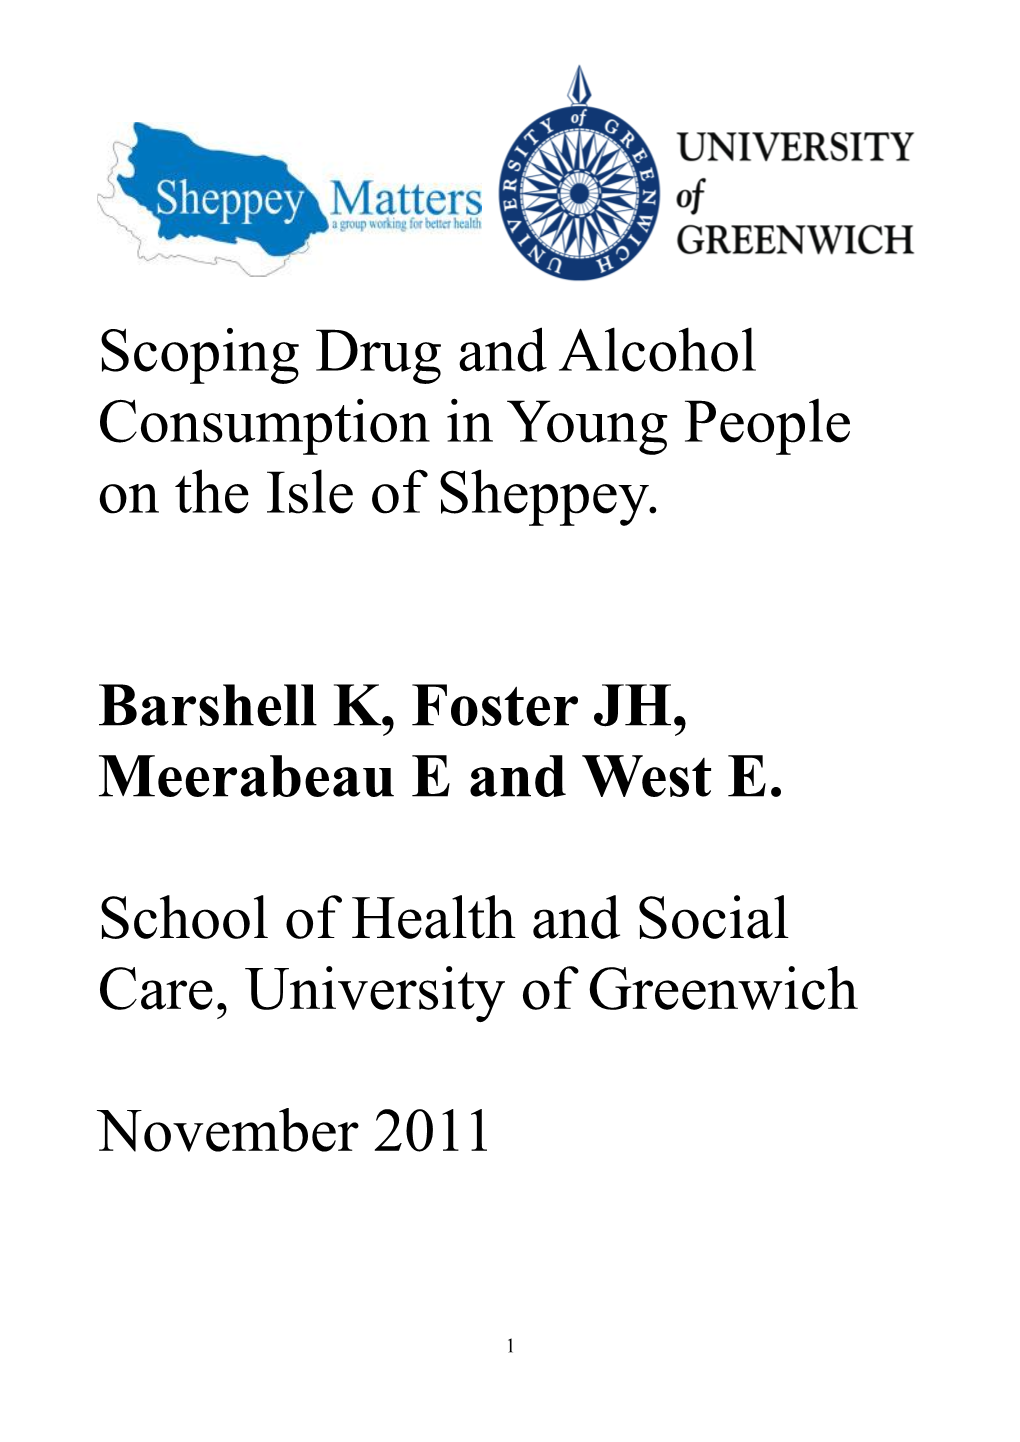 Scoping Drug and Alcohol Consumption in Young People on the Isle of Sheppey